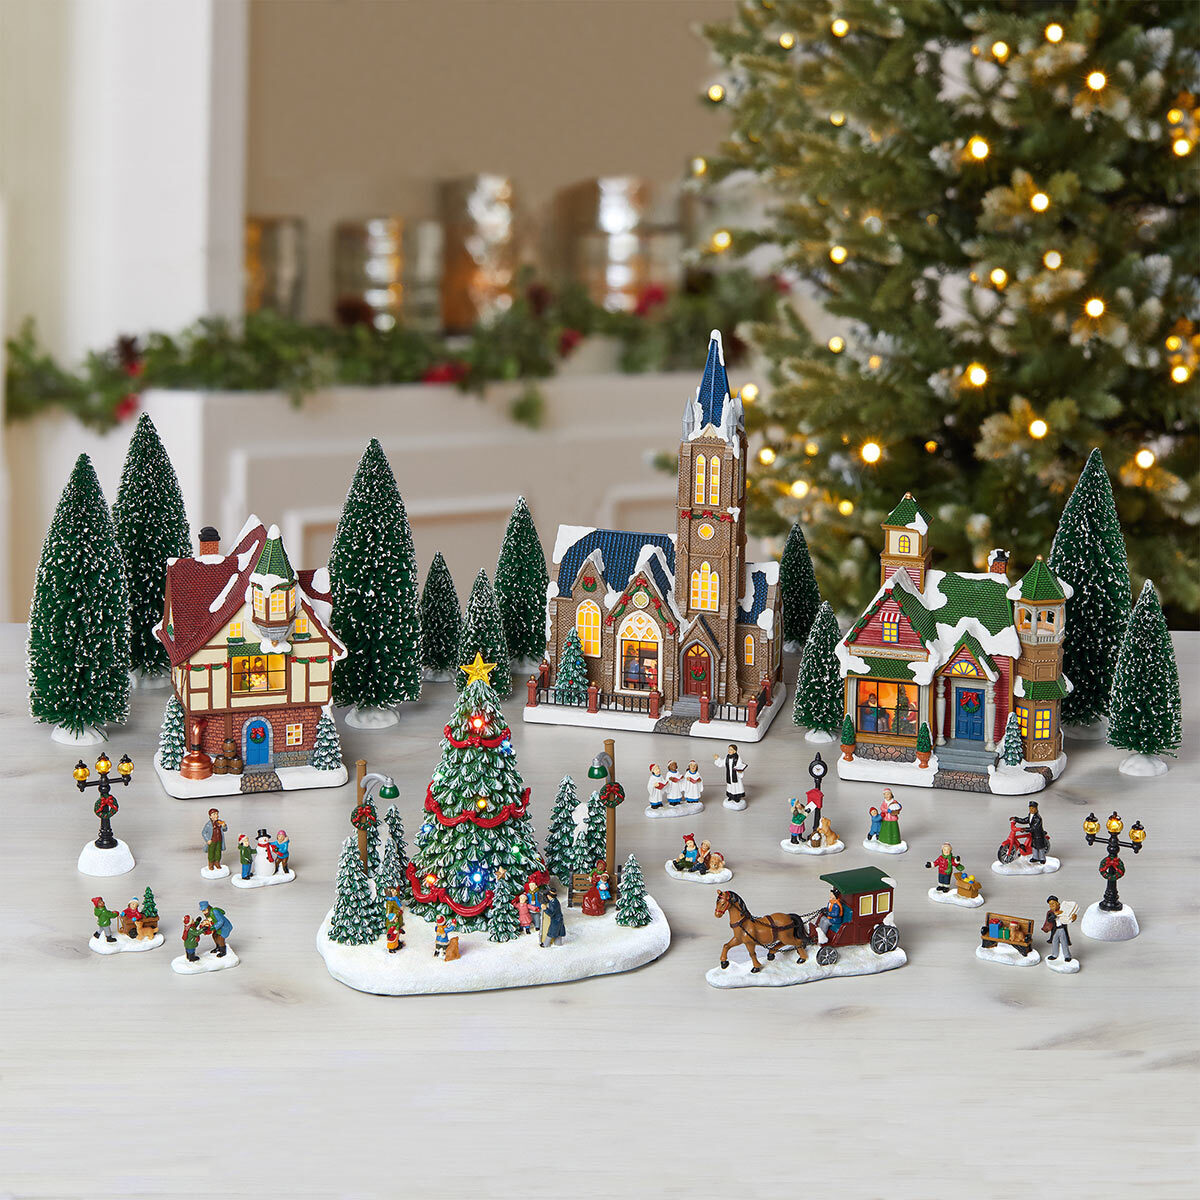 Buy Christmas Holiday Village 30 Pieces Lifestyle Image at Costco.co.uk